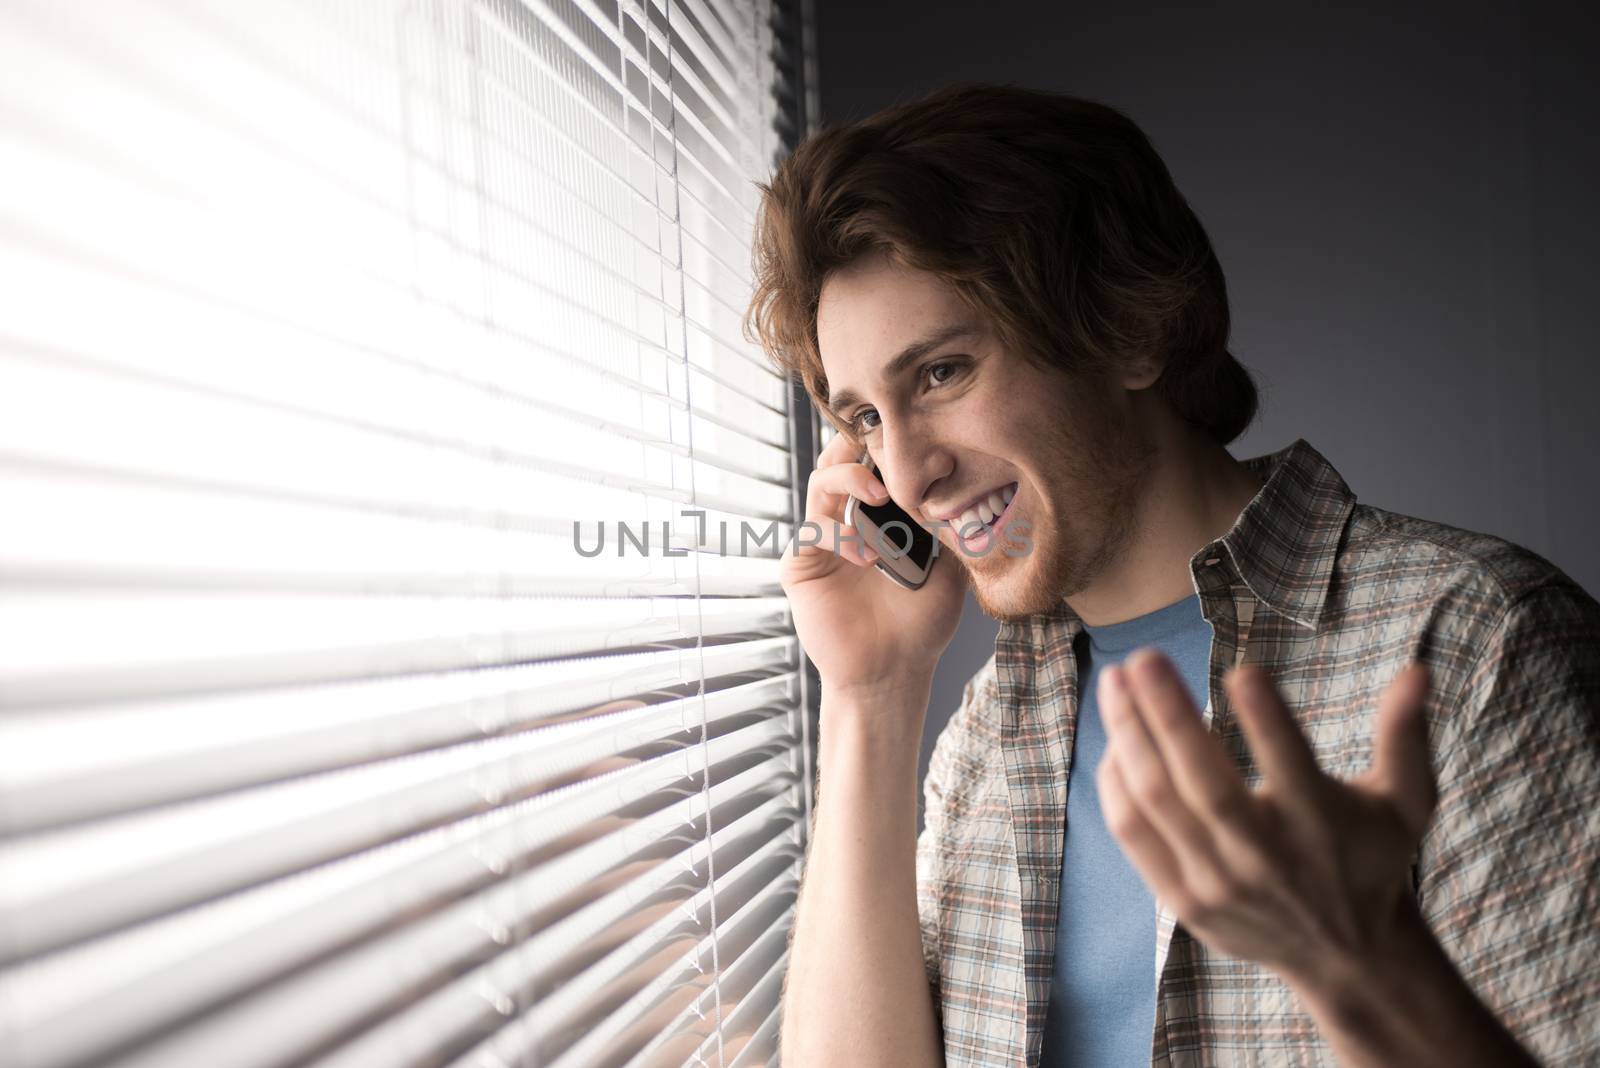 Young man smiling and talking on the phone in front of a window.